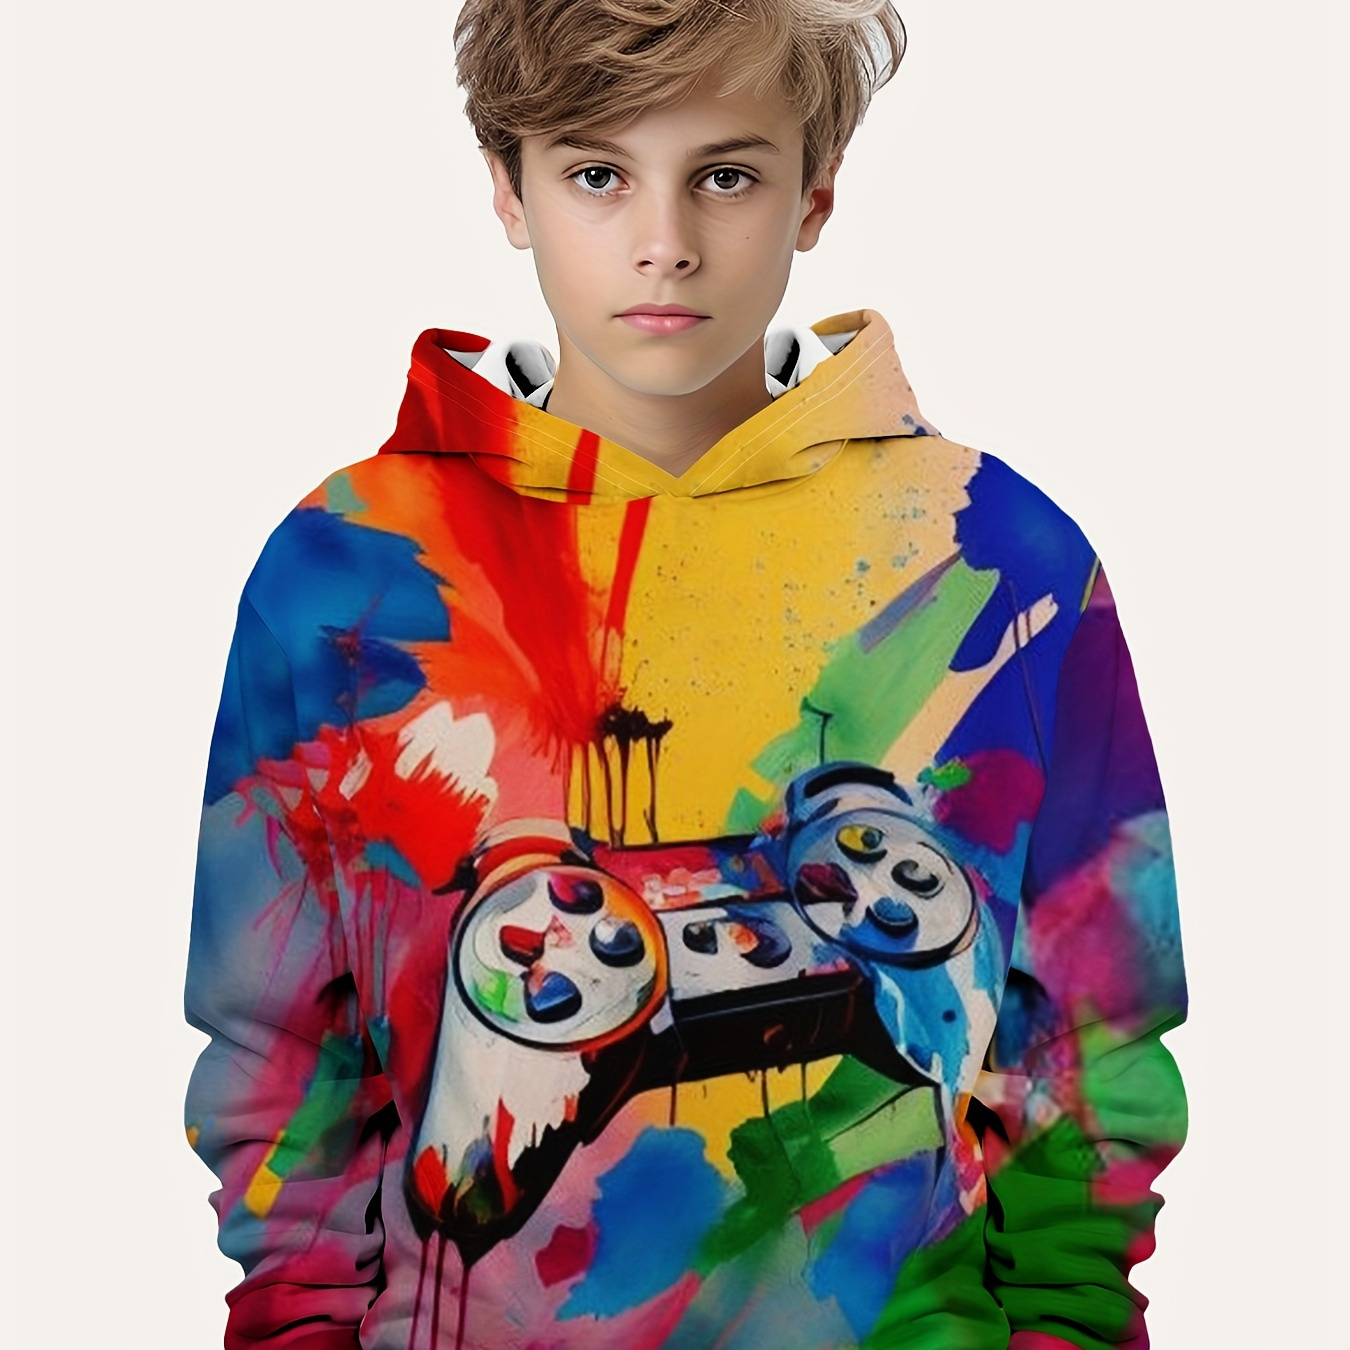 

Fashion Colorful Gamepad 3d Print Boys Casual Pullover Long Sleeve Hoodies, Boys Sweatshirt For Spring Fall, Kids Hoodie Tops Outdoor